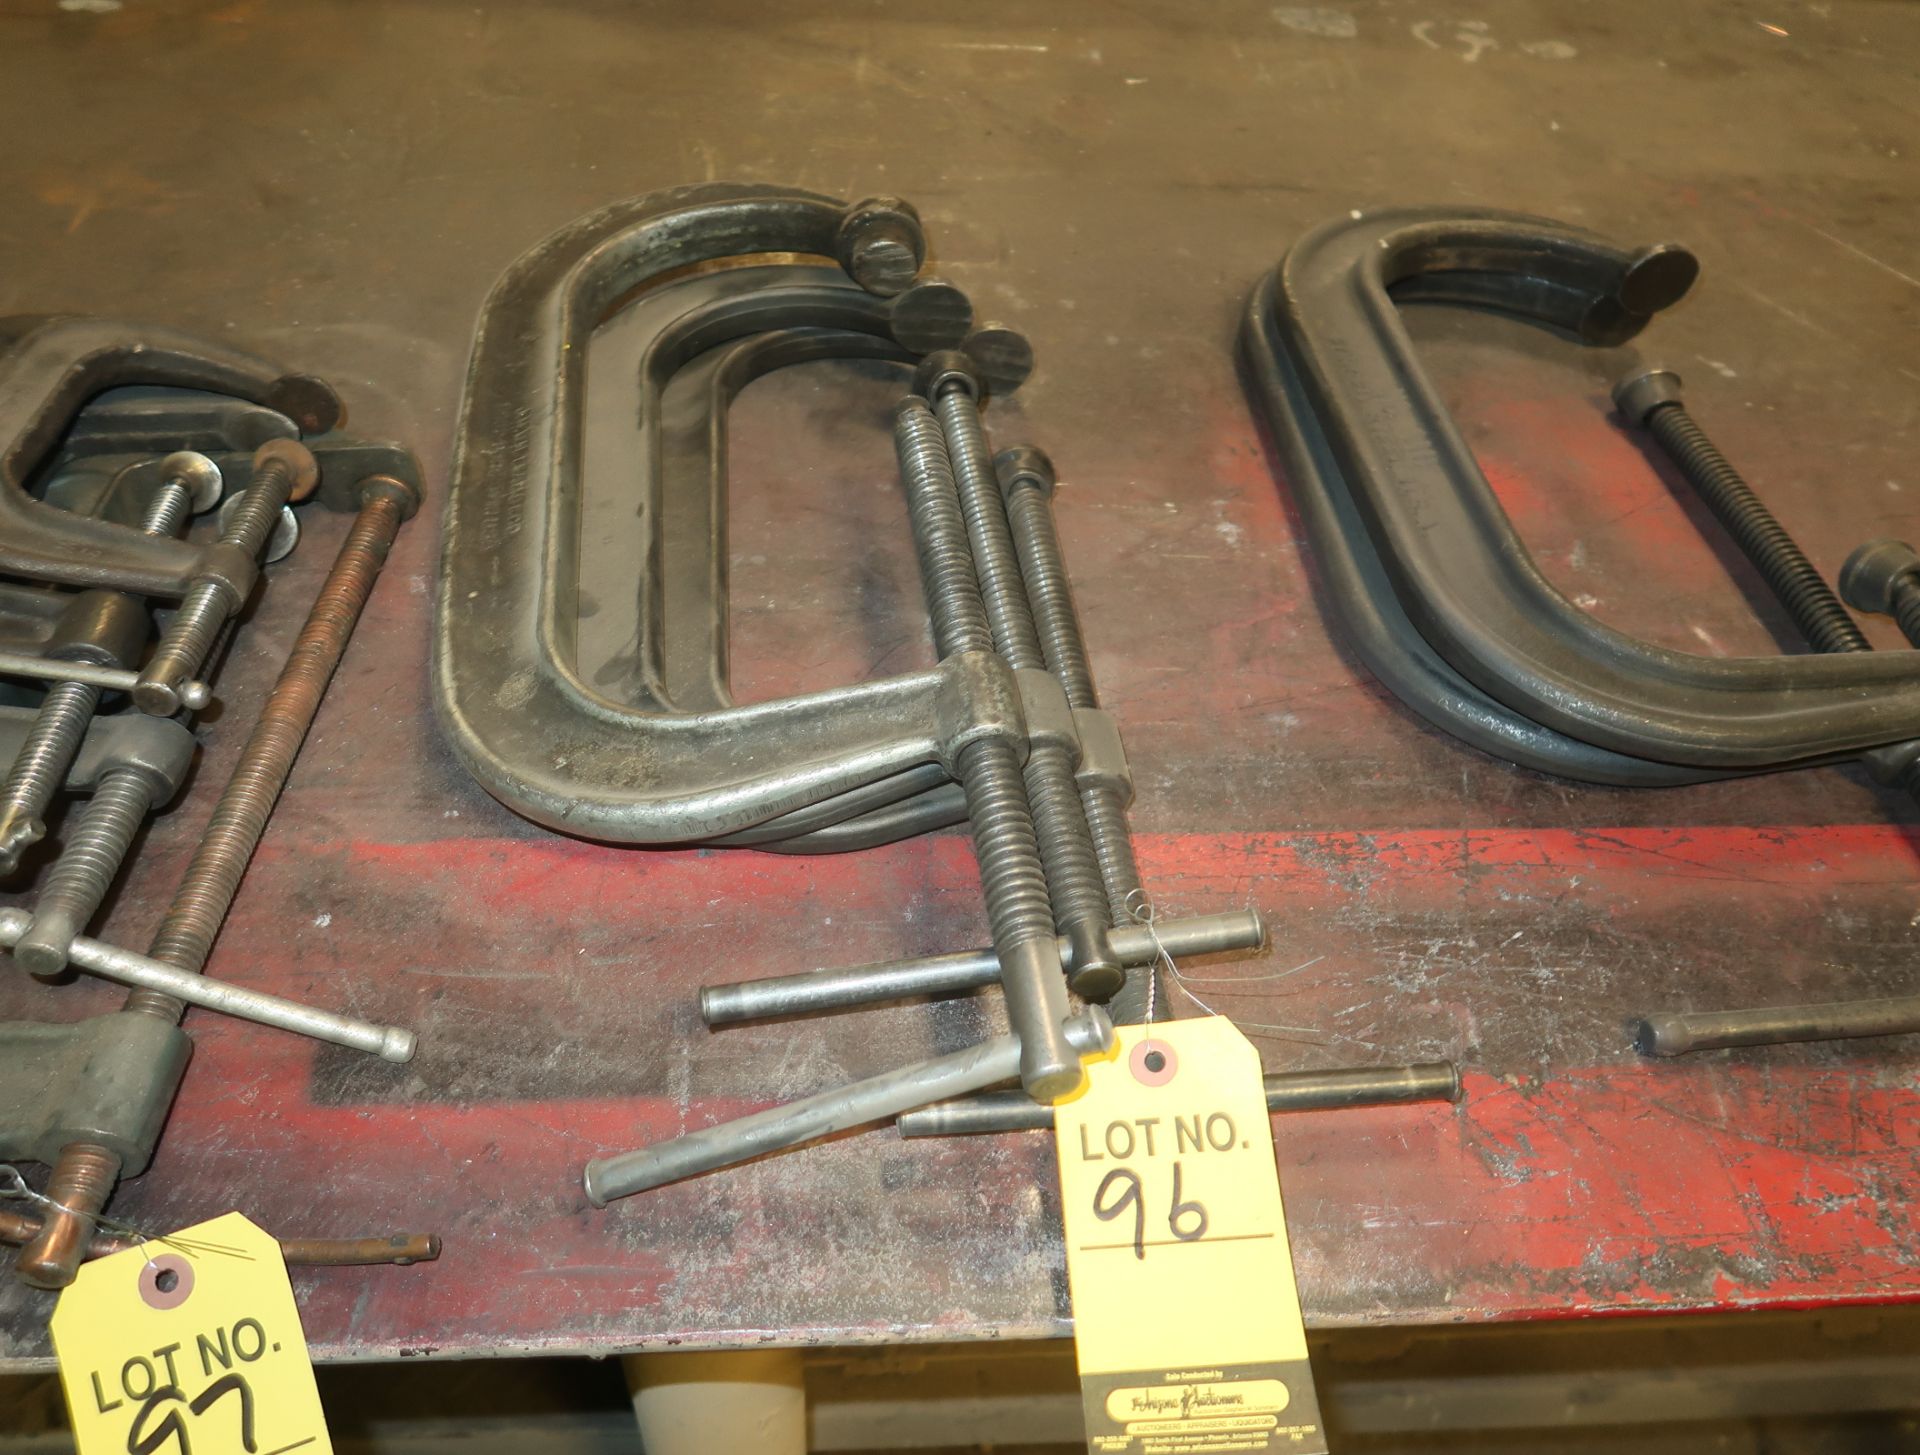 LOT 408 & 410 C-CLAMPS